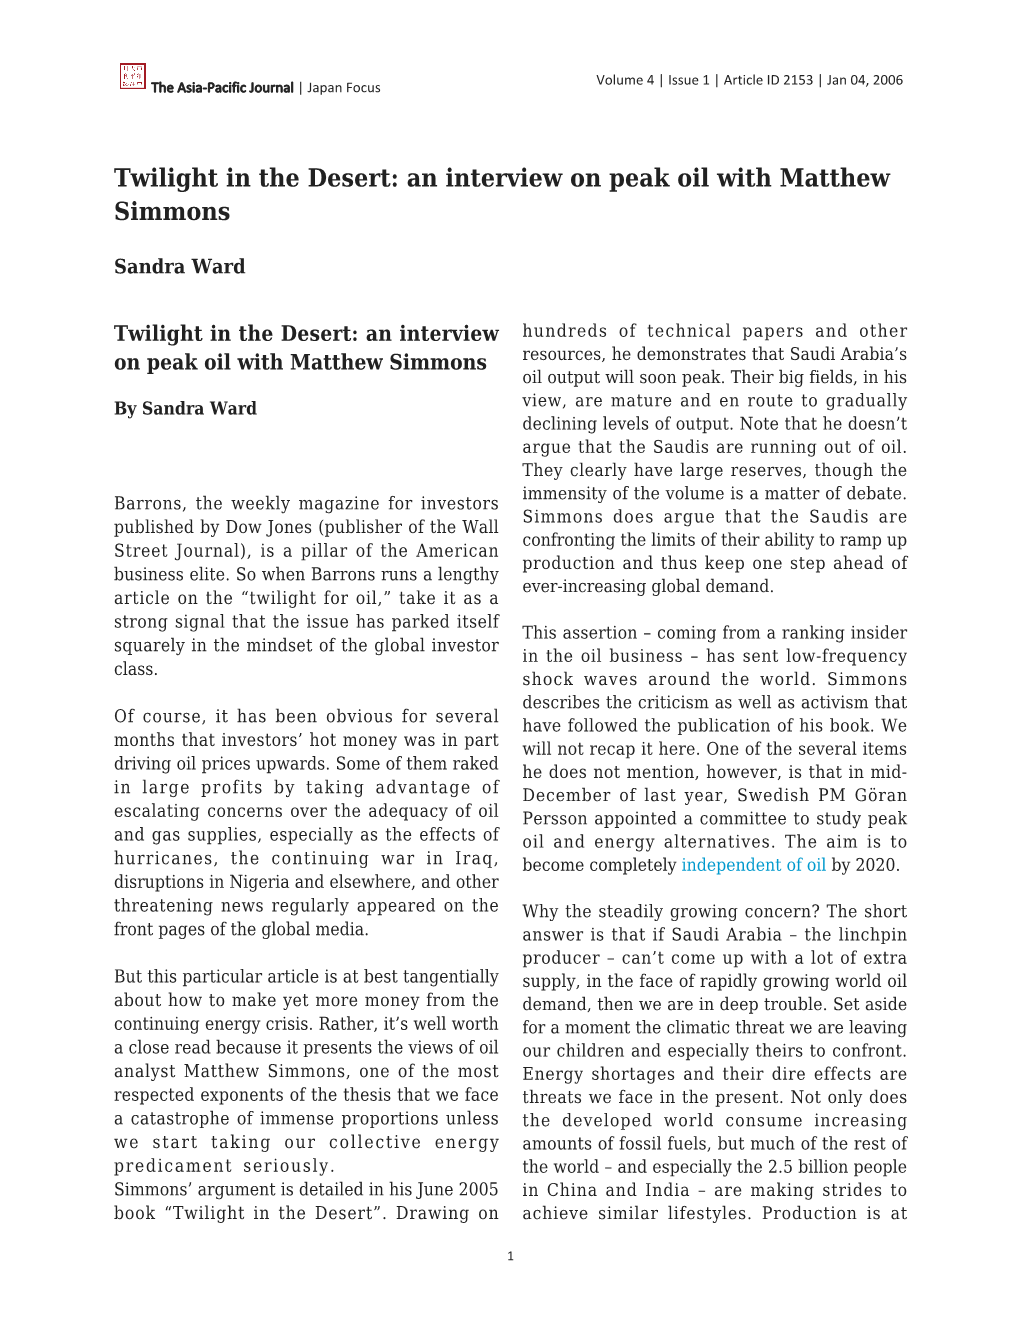 Twilight in the Desert: an Interview on Peak Oil with Matthew Simmons